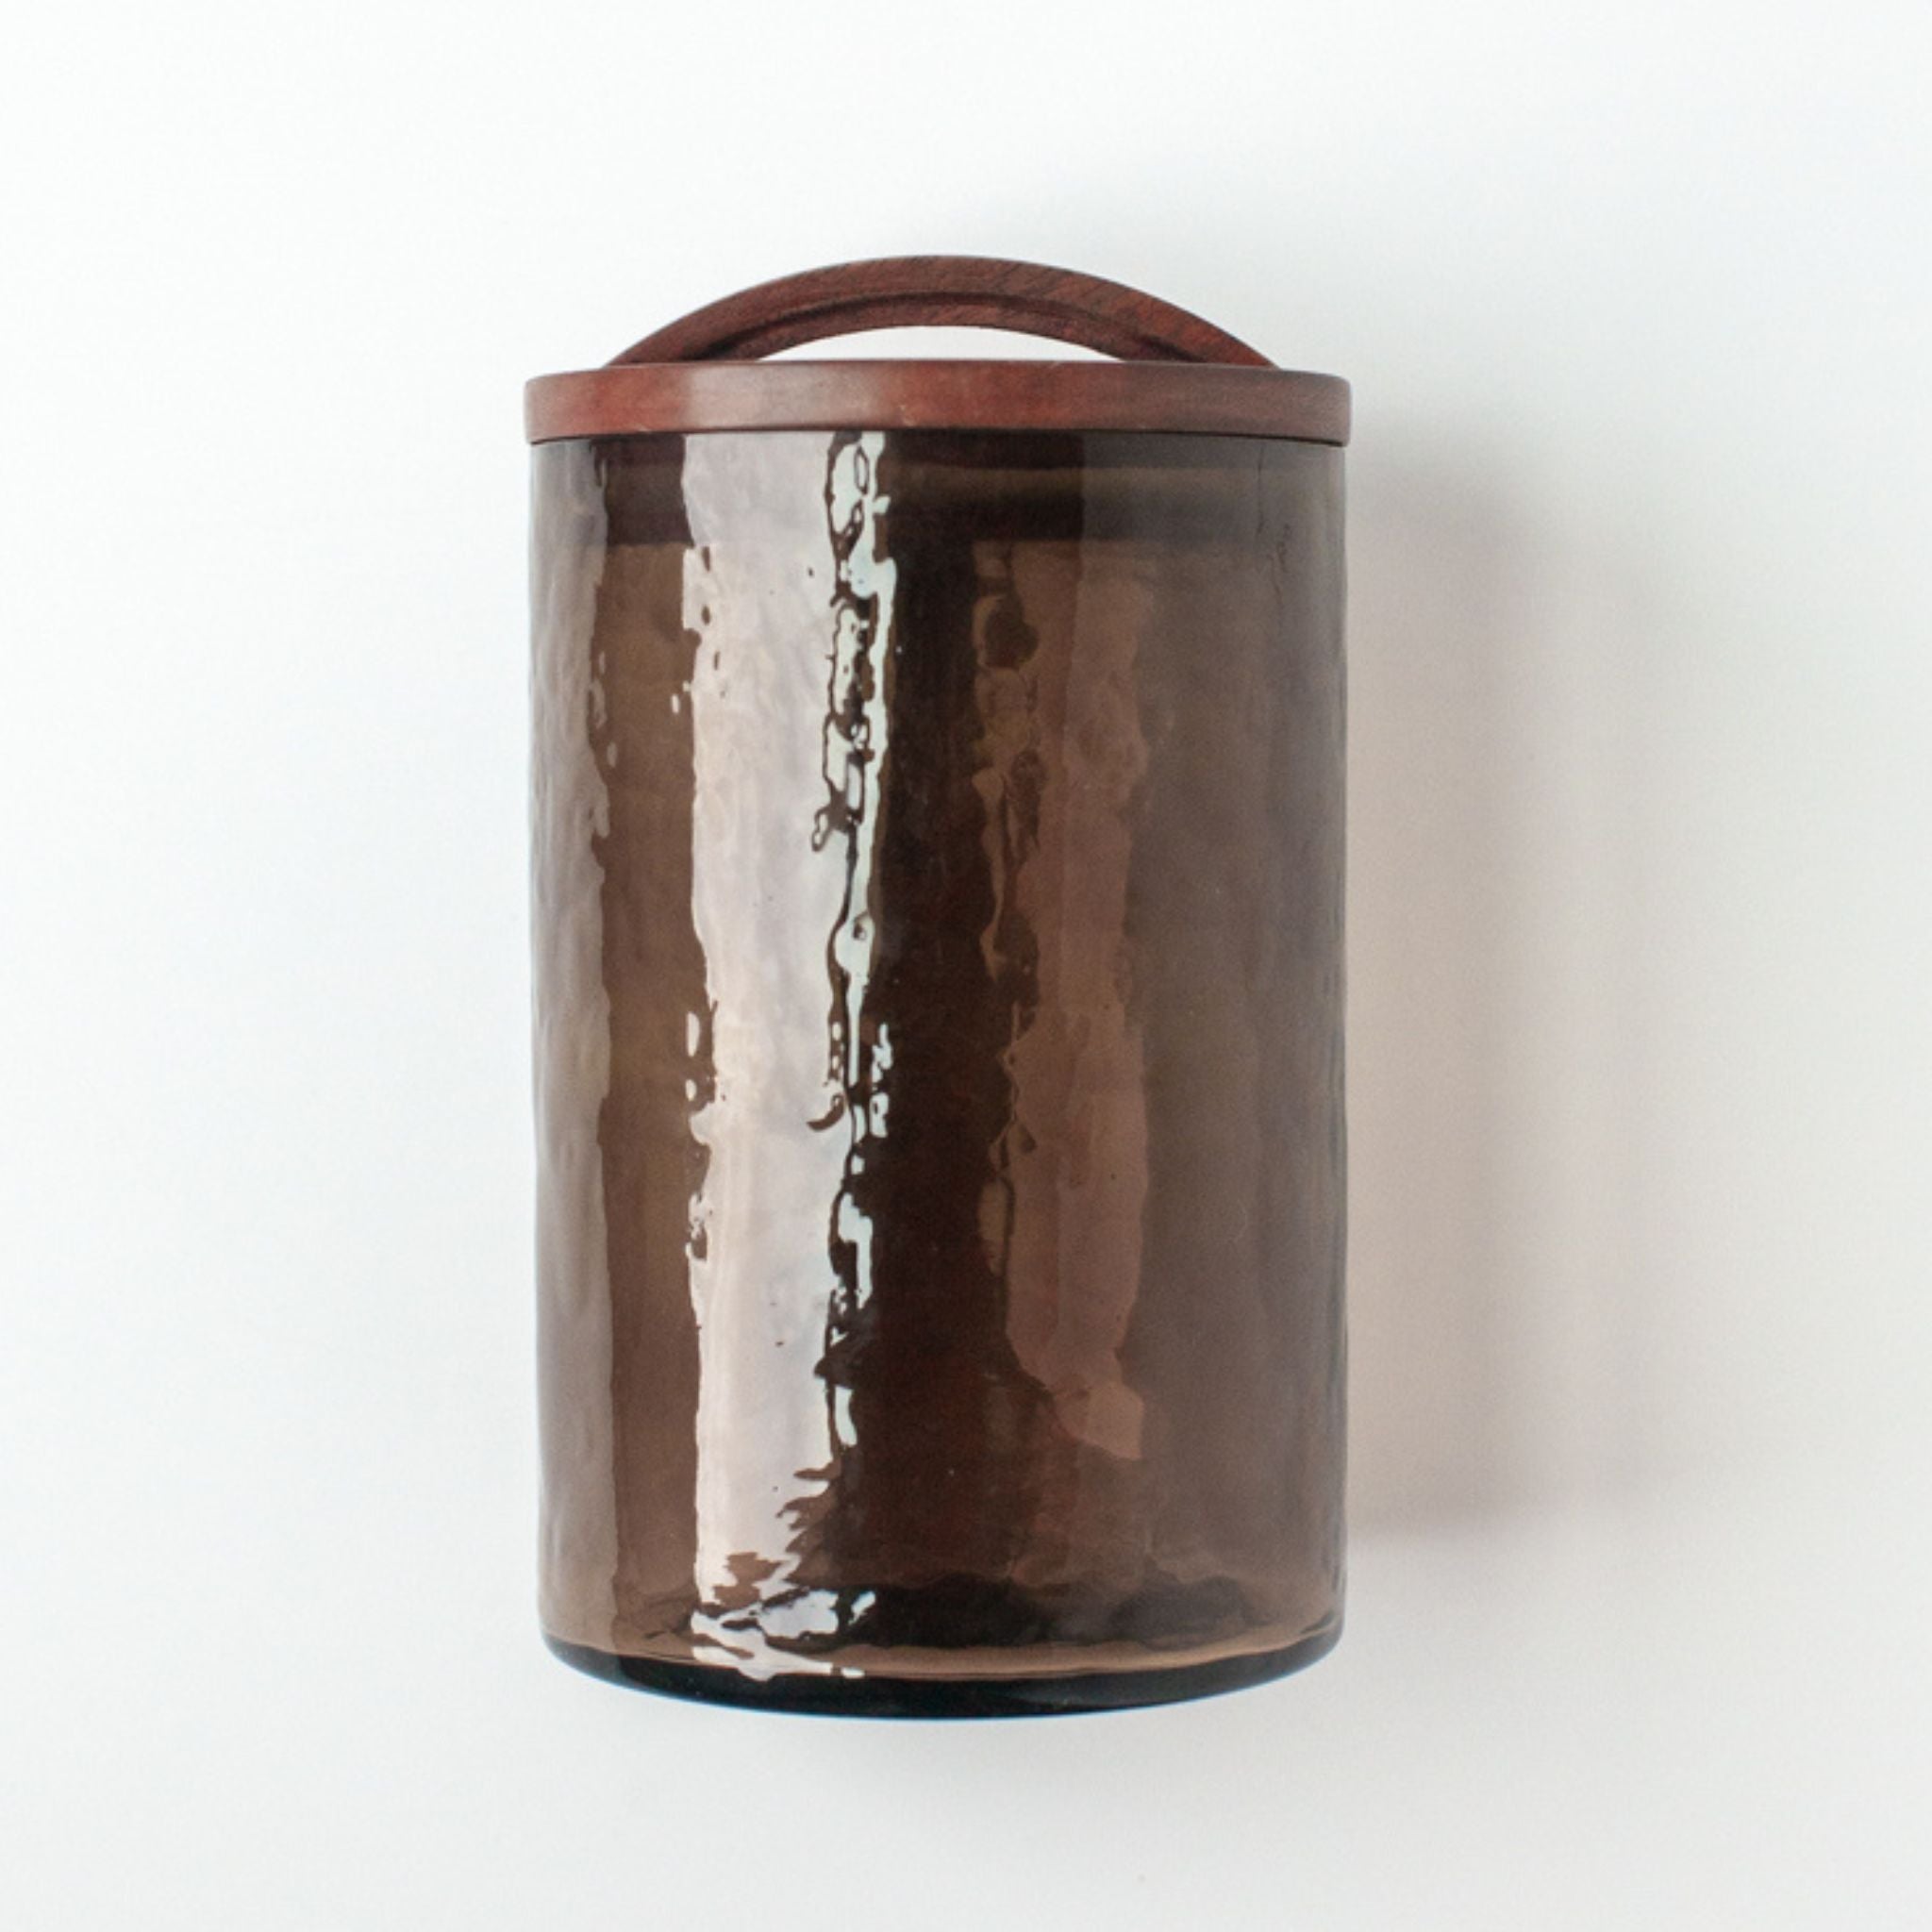 Handblown Hammered Glass Canisters - Valley Variety